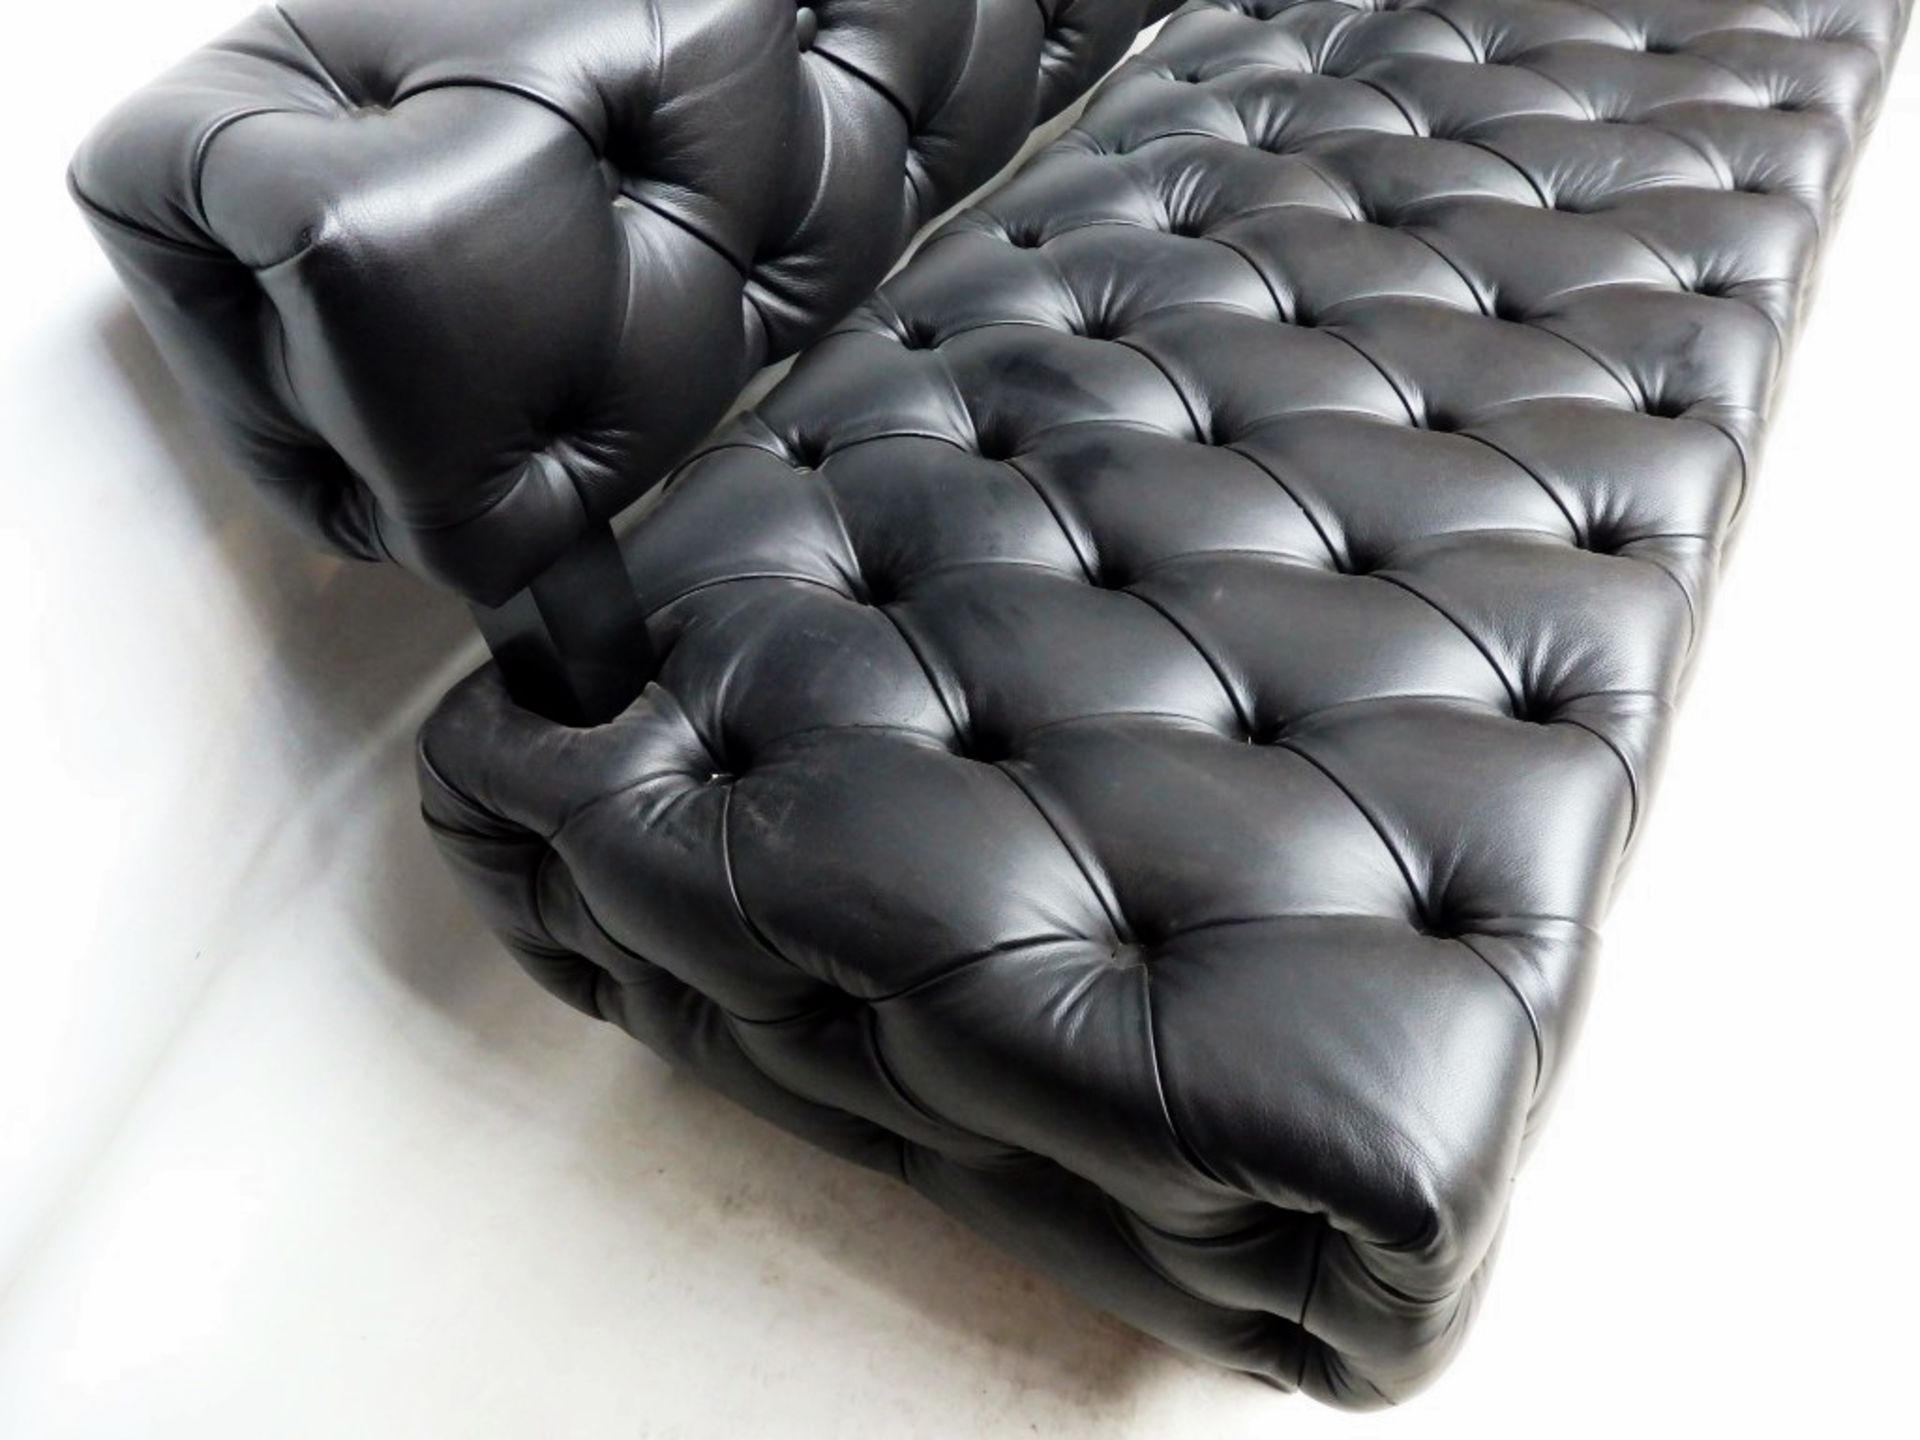 1 x Black Leather Buttoned Bench Seating - Ref: DB017 - Expertly Built And Upholstered By British - Image 3 of 5